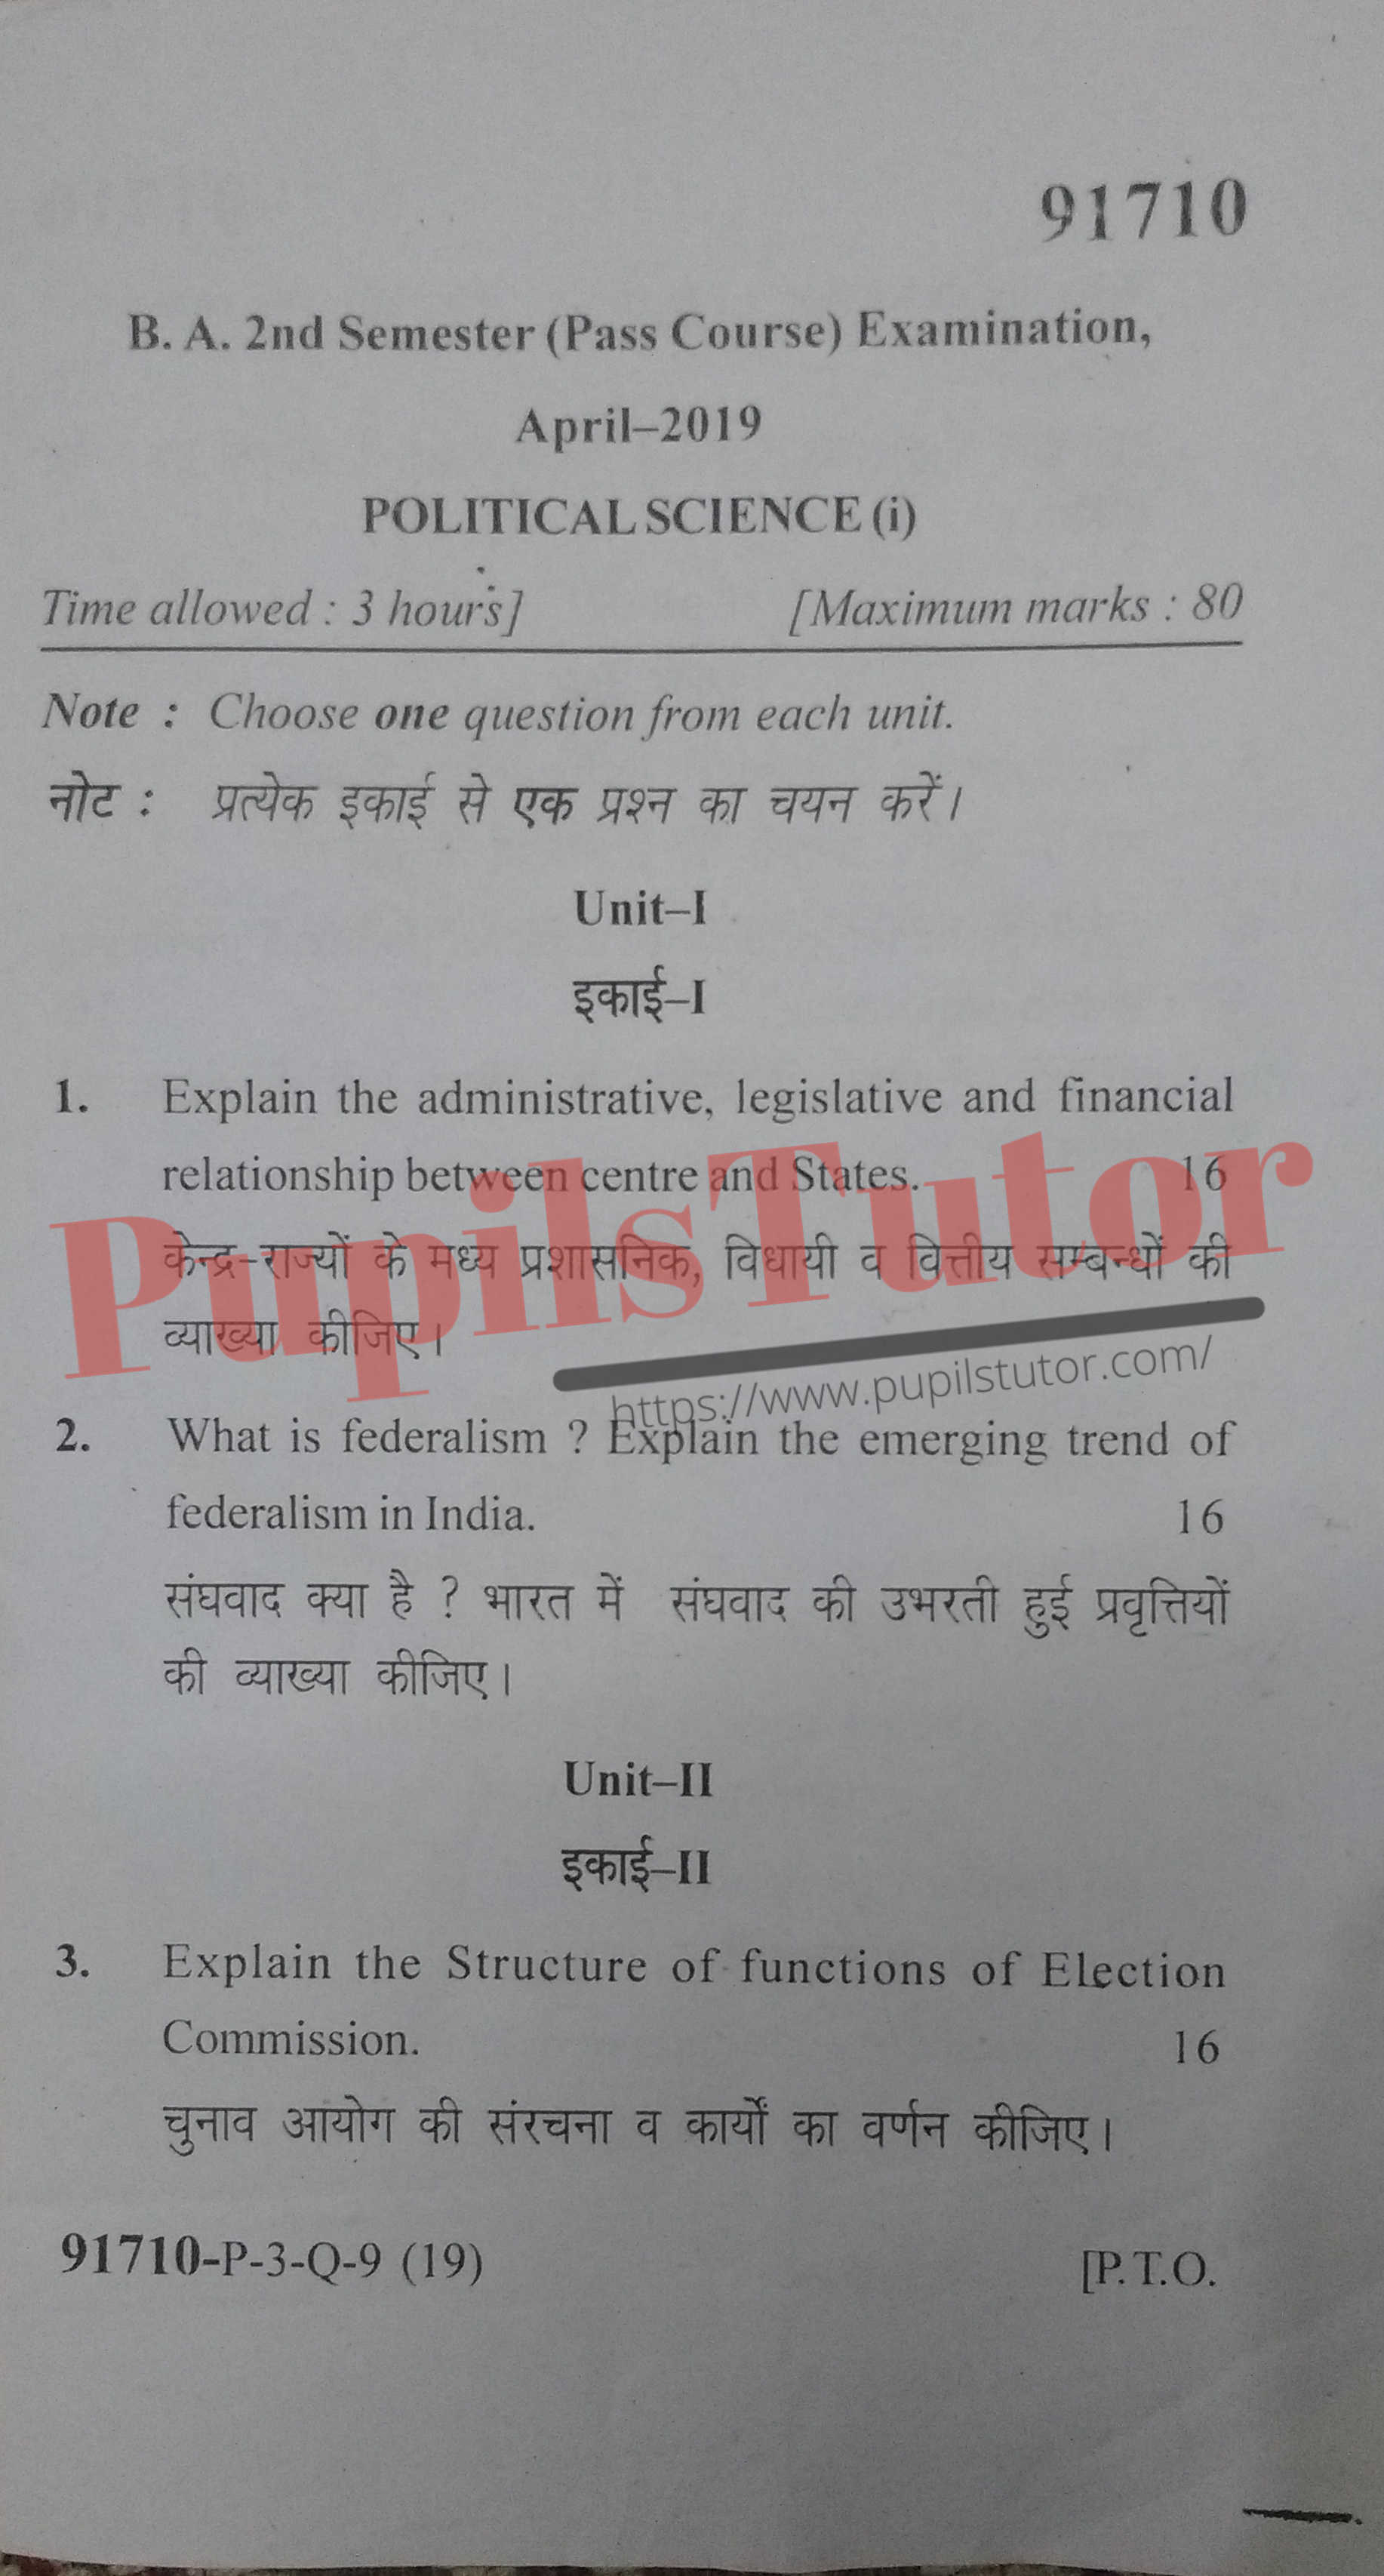 MDU (Maharshi Dayanand University, Rohtak Haryana) BA Pass Course Second Semester Previous Year Political Science Question Paper For April, 2019 Exam (Question Paper Page 1) - pupilstutor.com